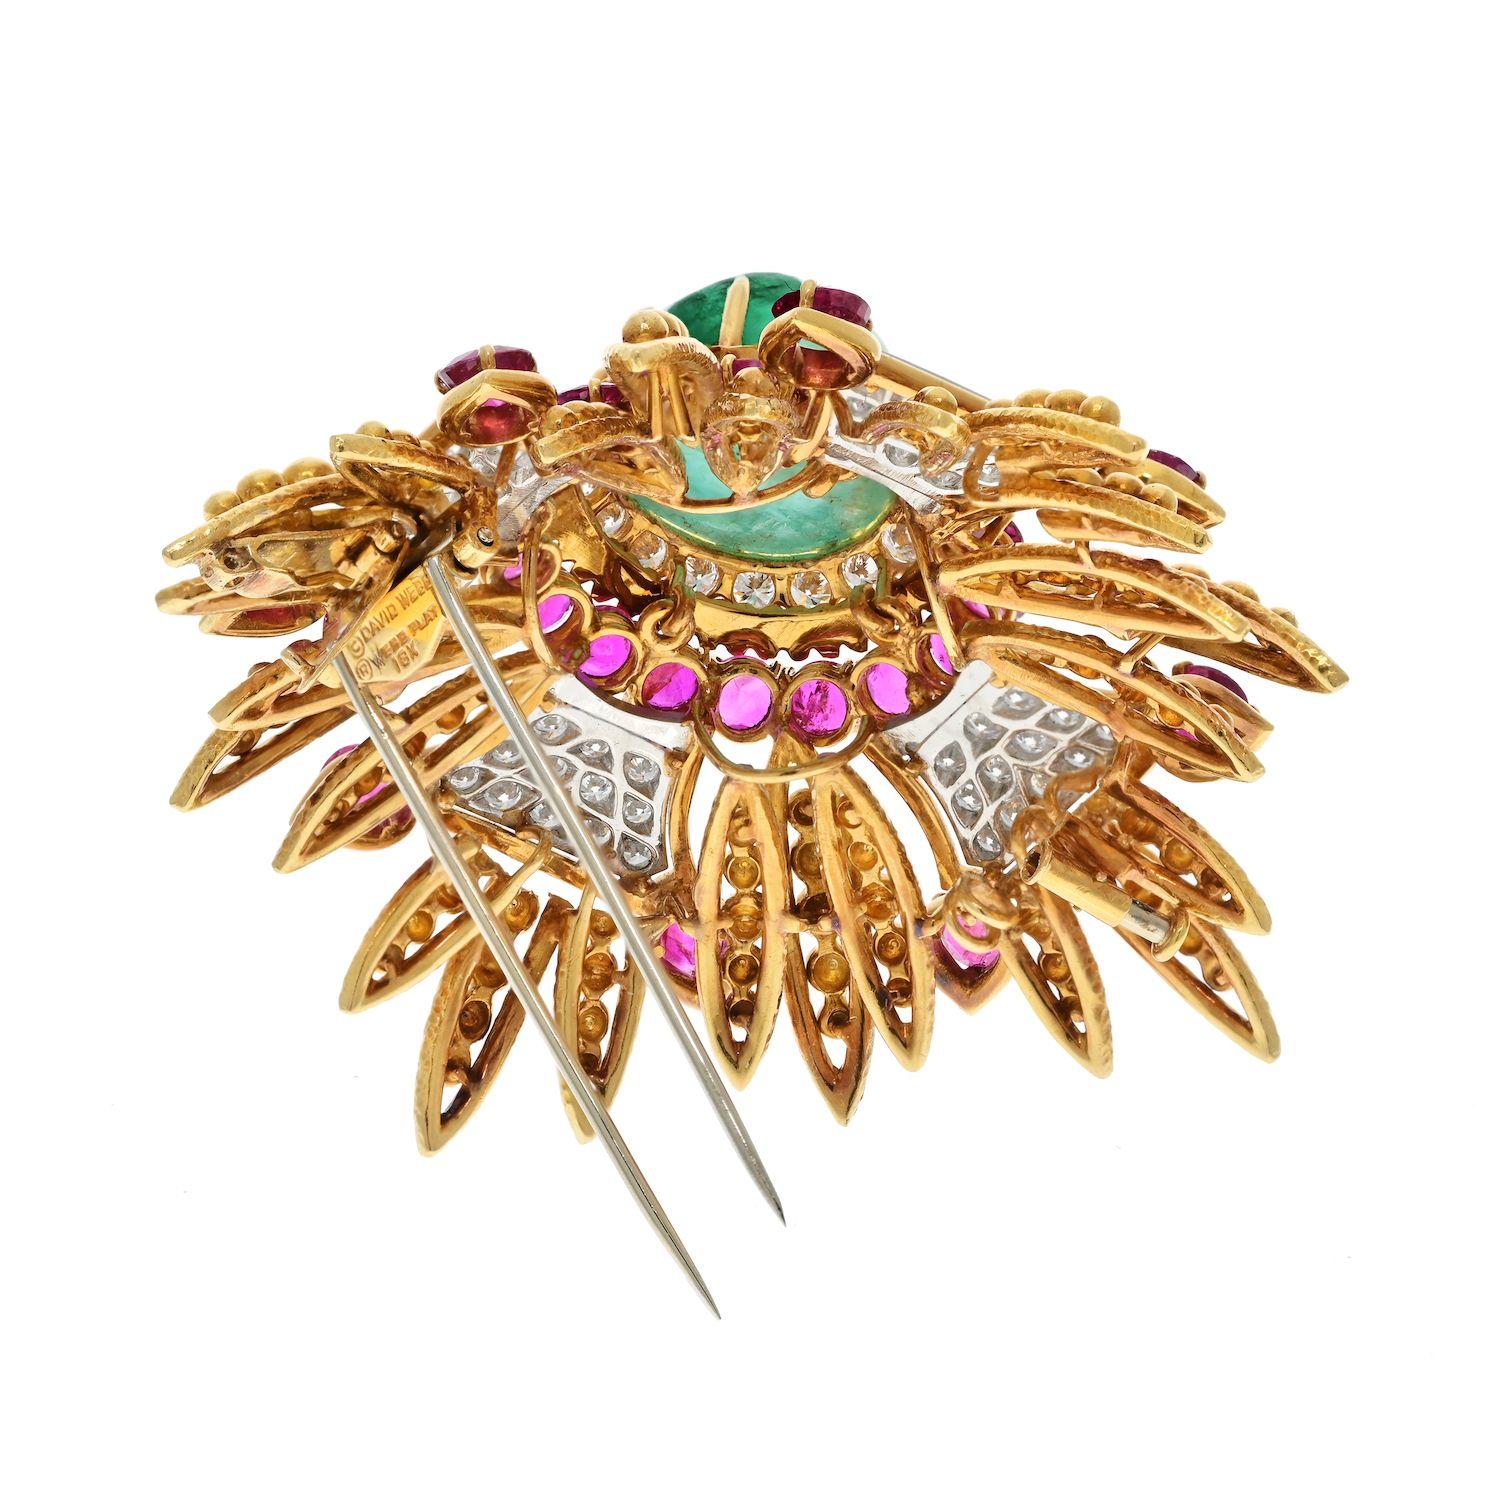 The David Webb Platinum & 18K Yellow Gold 1960's Green Emerald, Rubies, and Diamonds Pendant Brooch is a stunning piece of jewelry that showcases the exceptional craftsmanship and design associated with David Webb. Crafted in a combination of